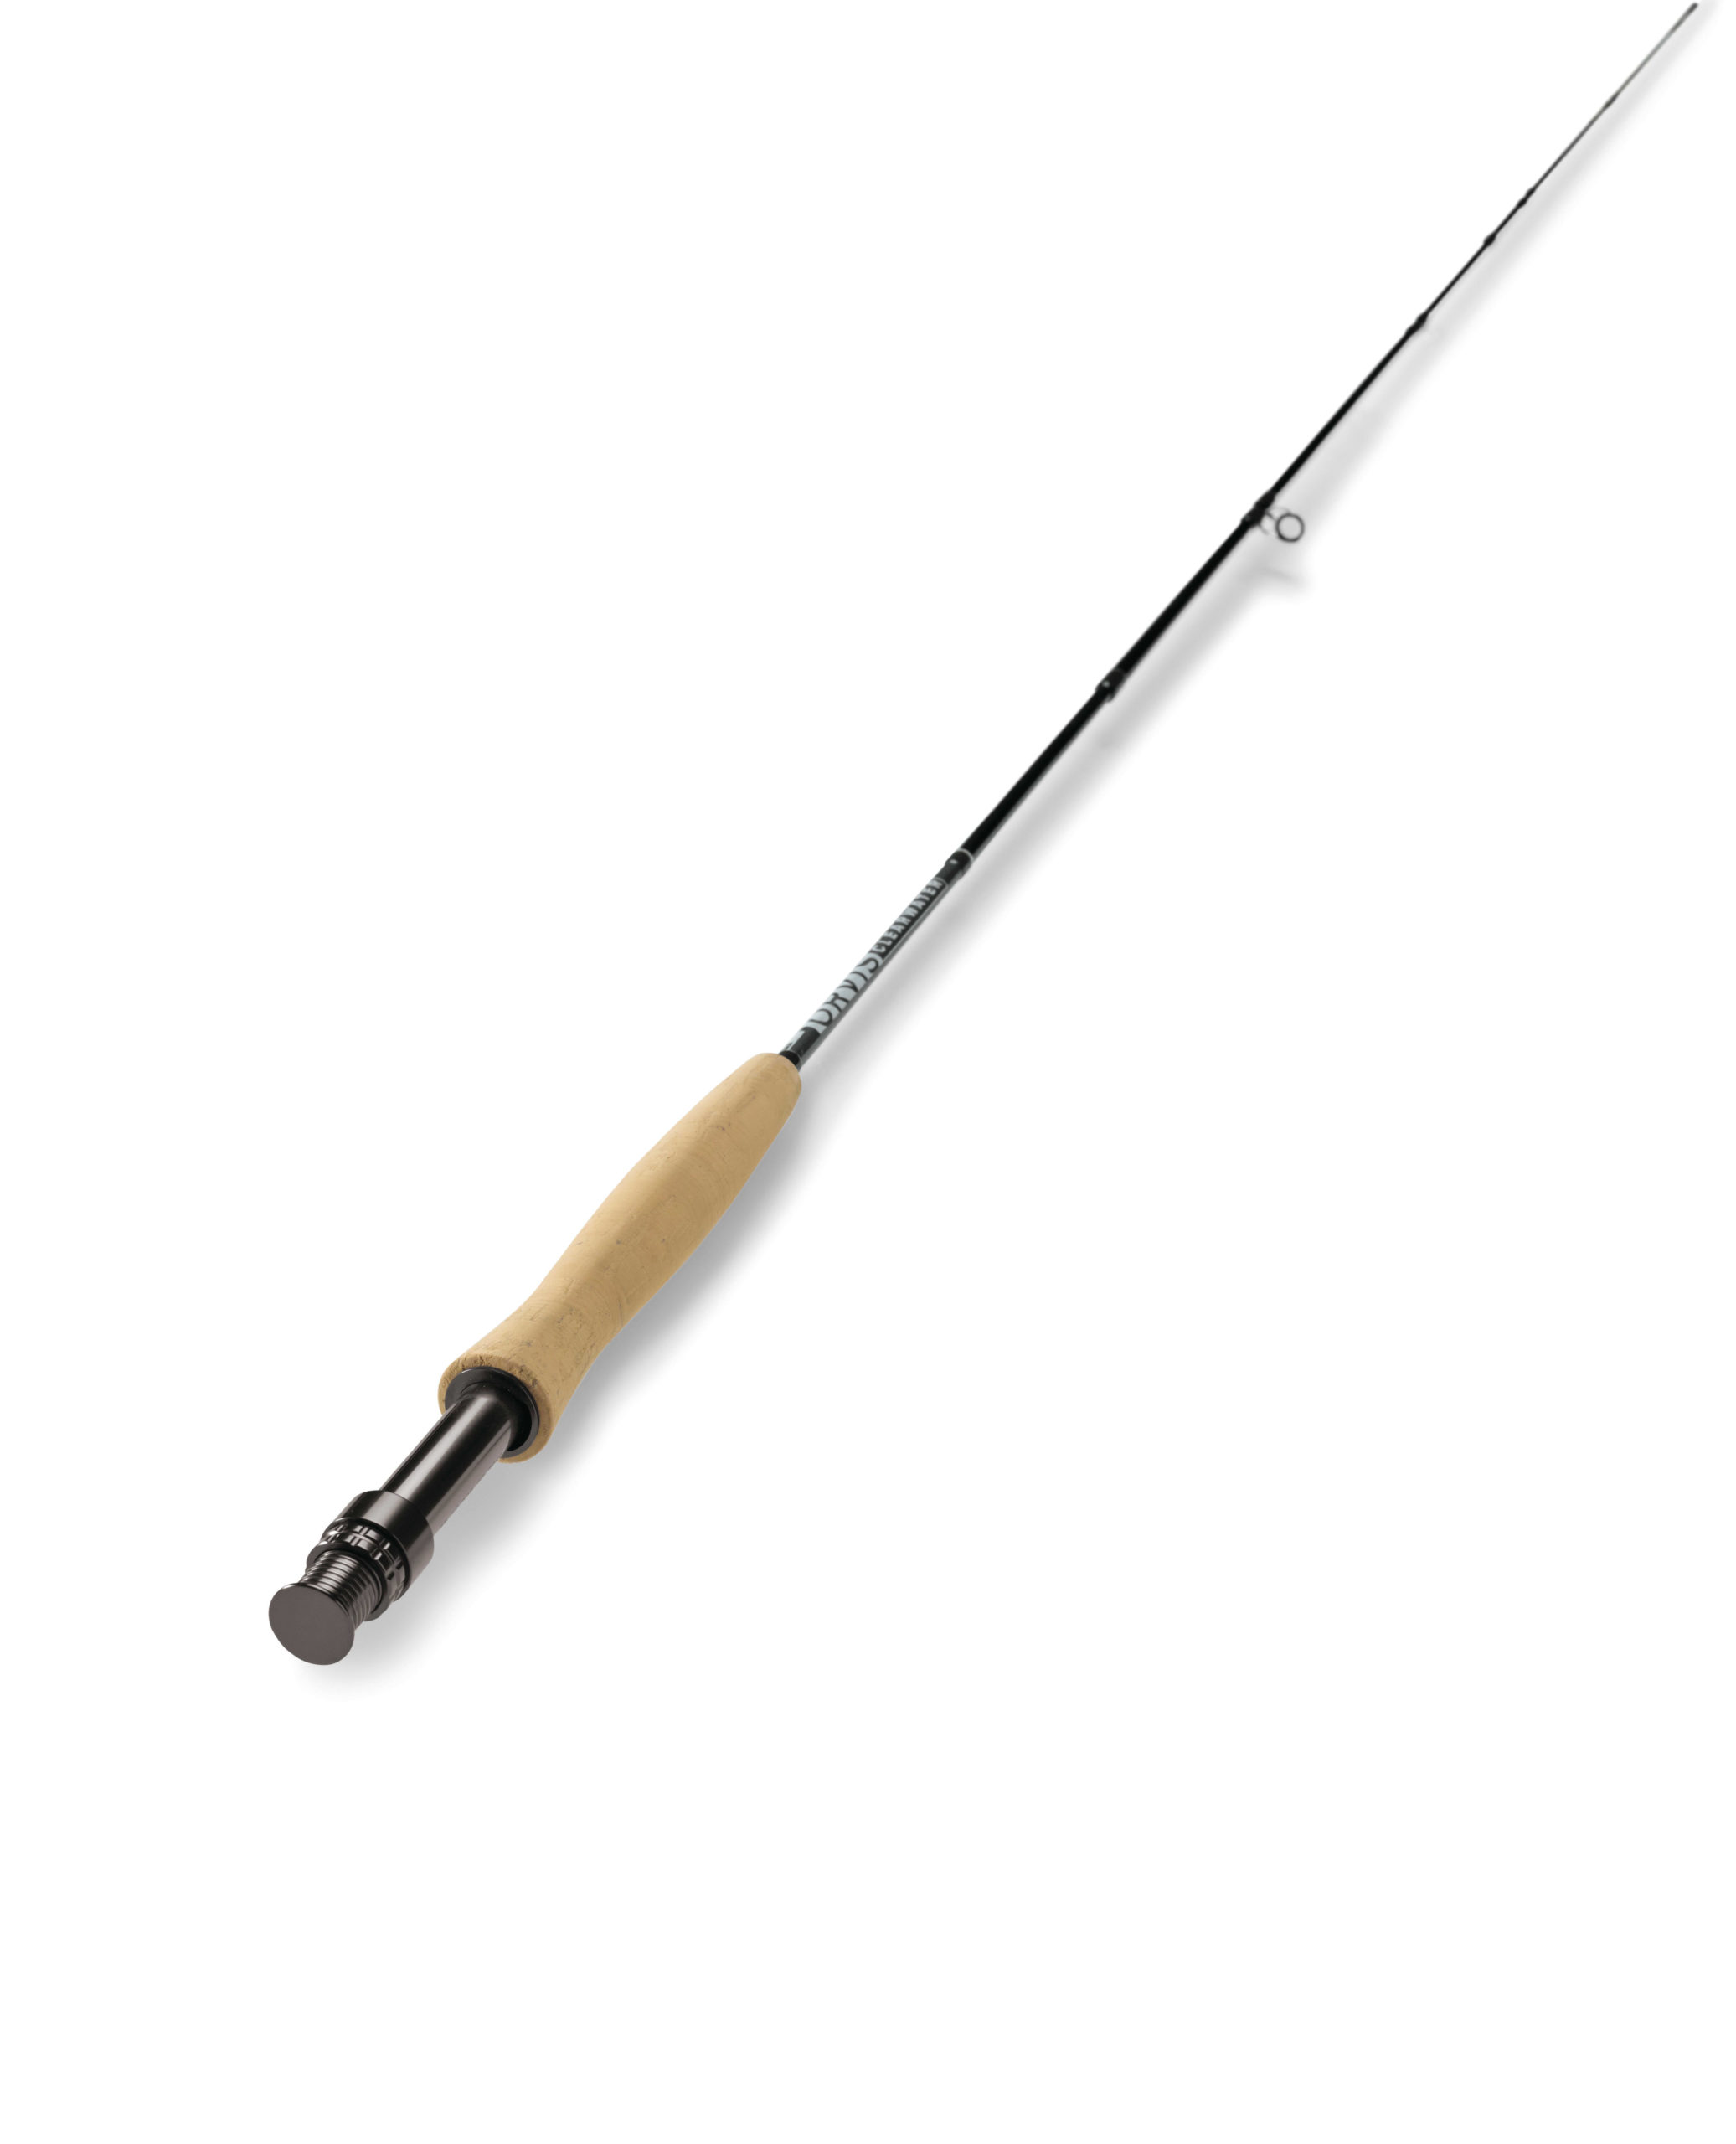 Orvis Clearwater Fly Rod - The Bent Rod